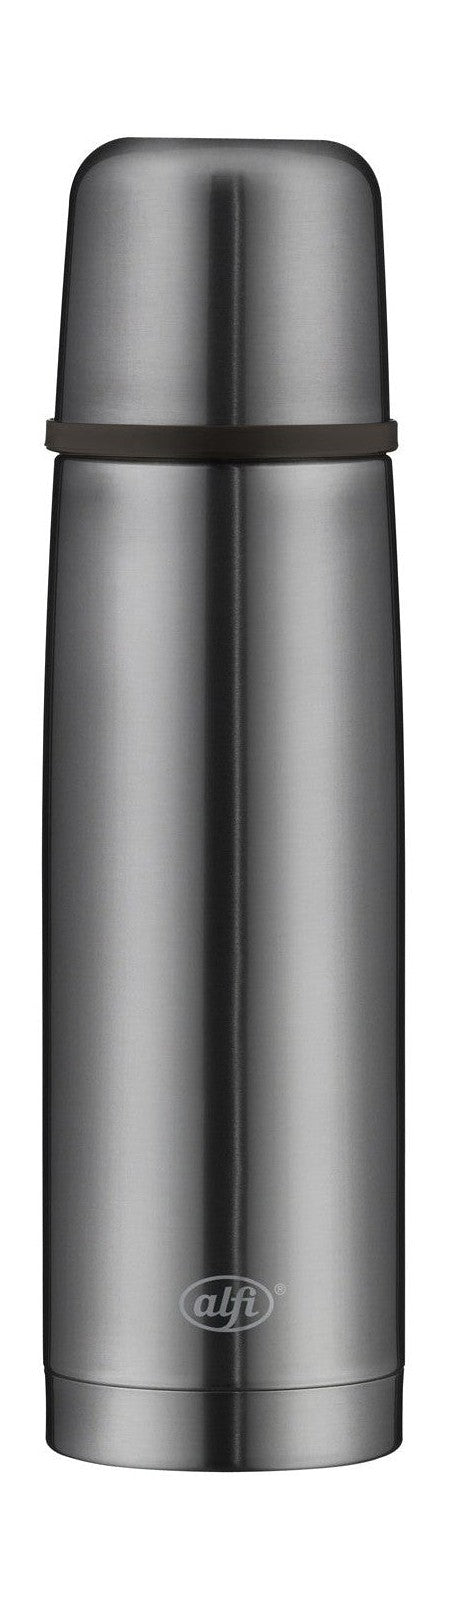 Alfi ISO Therm Perfect Thermo Bottle 0,75 litre. Gris cool mat